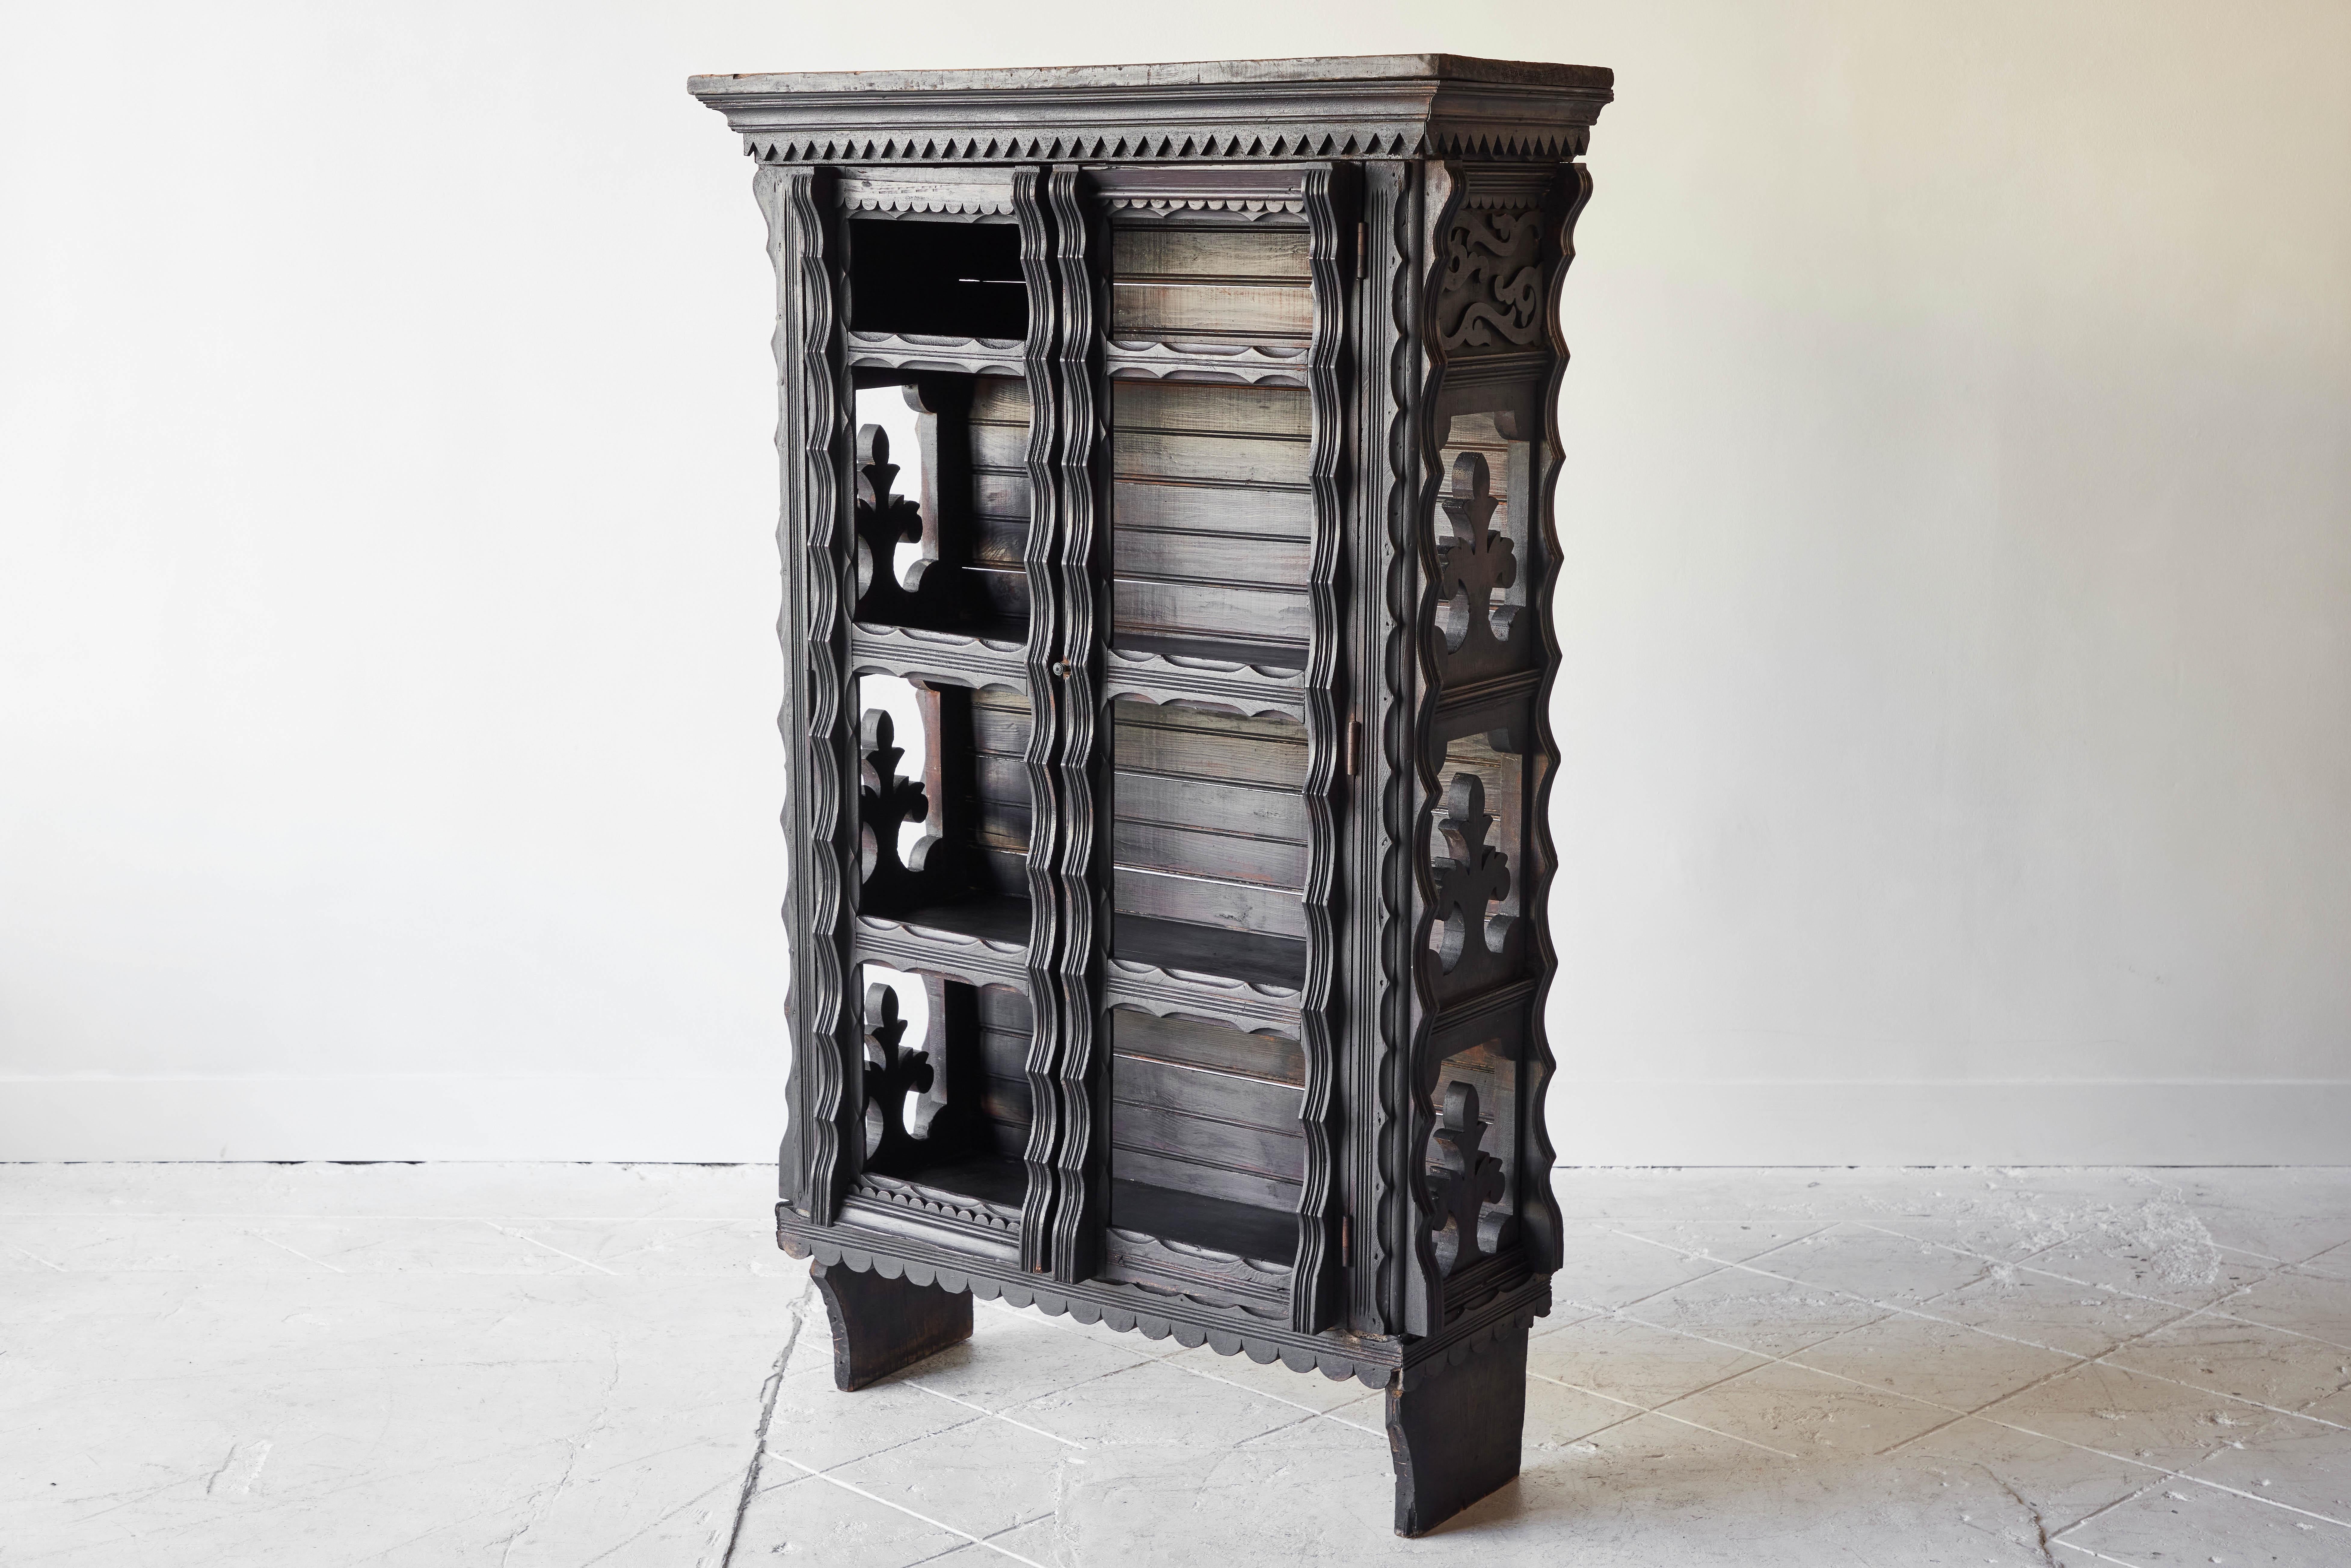 Decorative wood carved shelving unit from Spanish Colonial Mexico features an ornate pattern with beautifully carved designs on the front and sides. It is the perfect piece to display valuables or books as the interior has 3 shelves and the doors